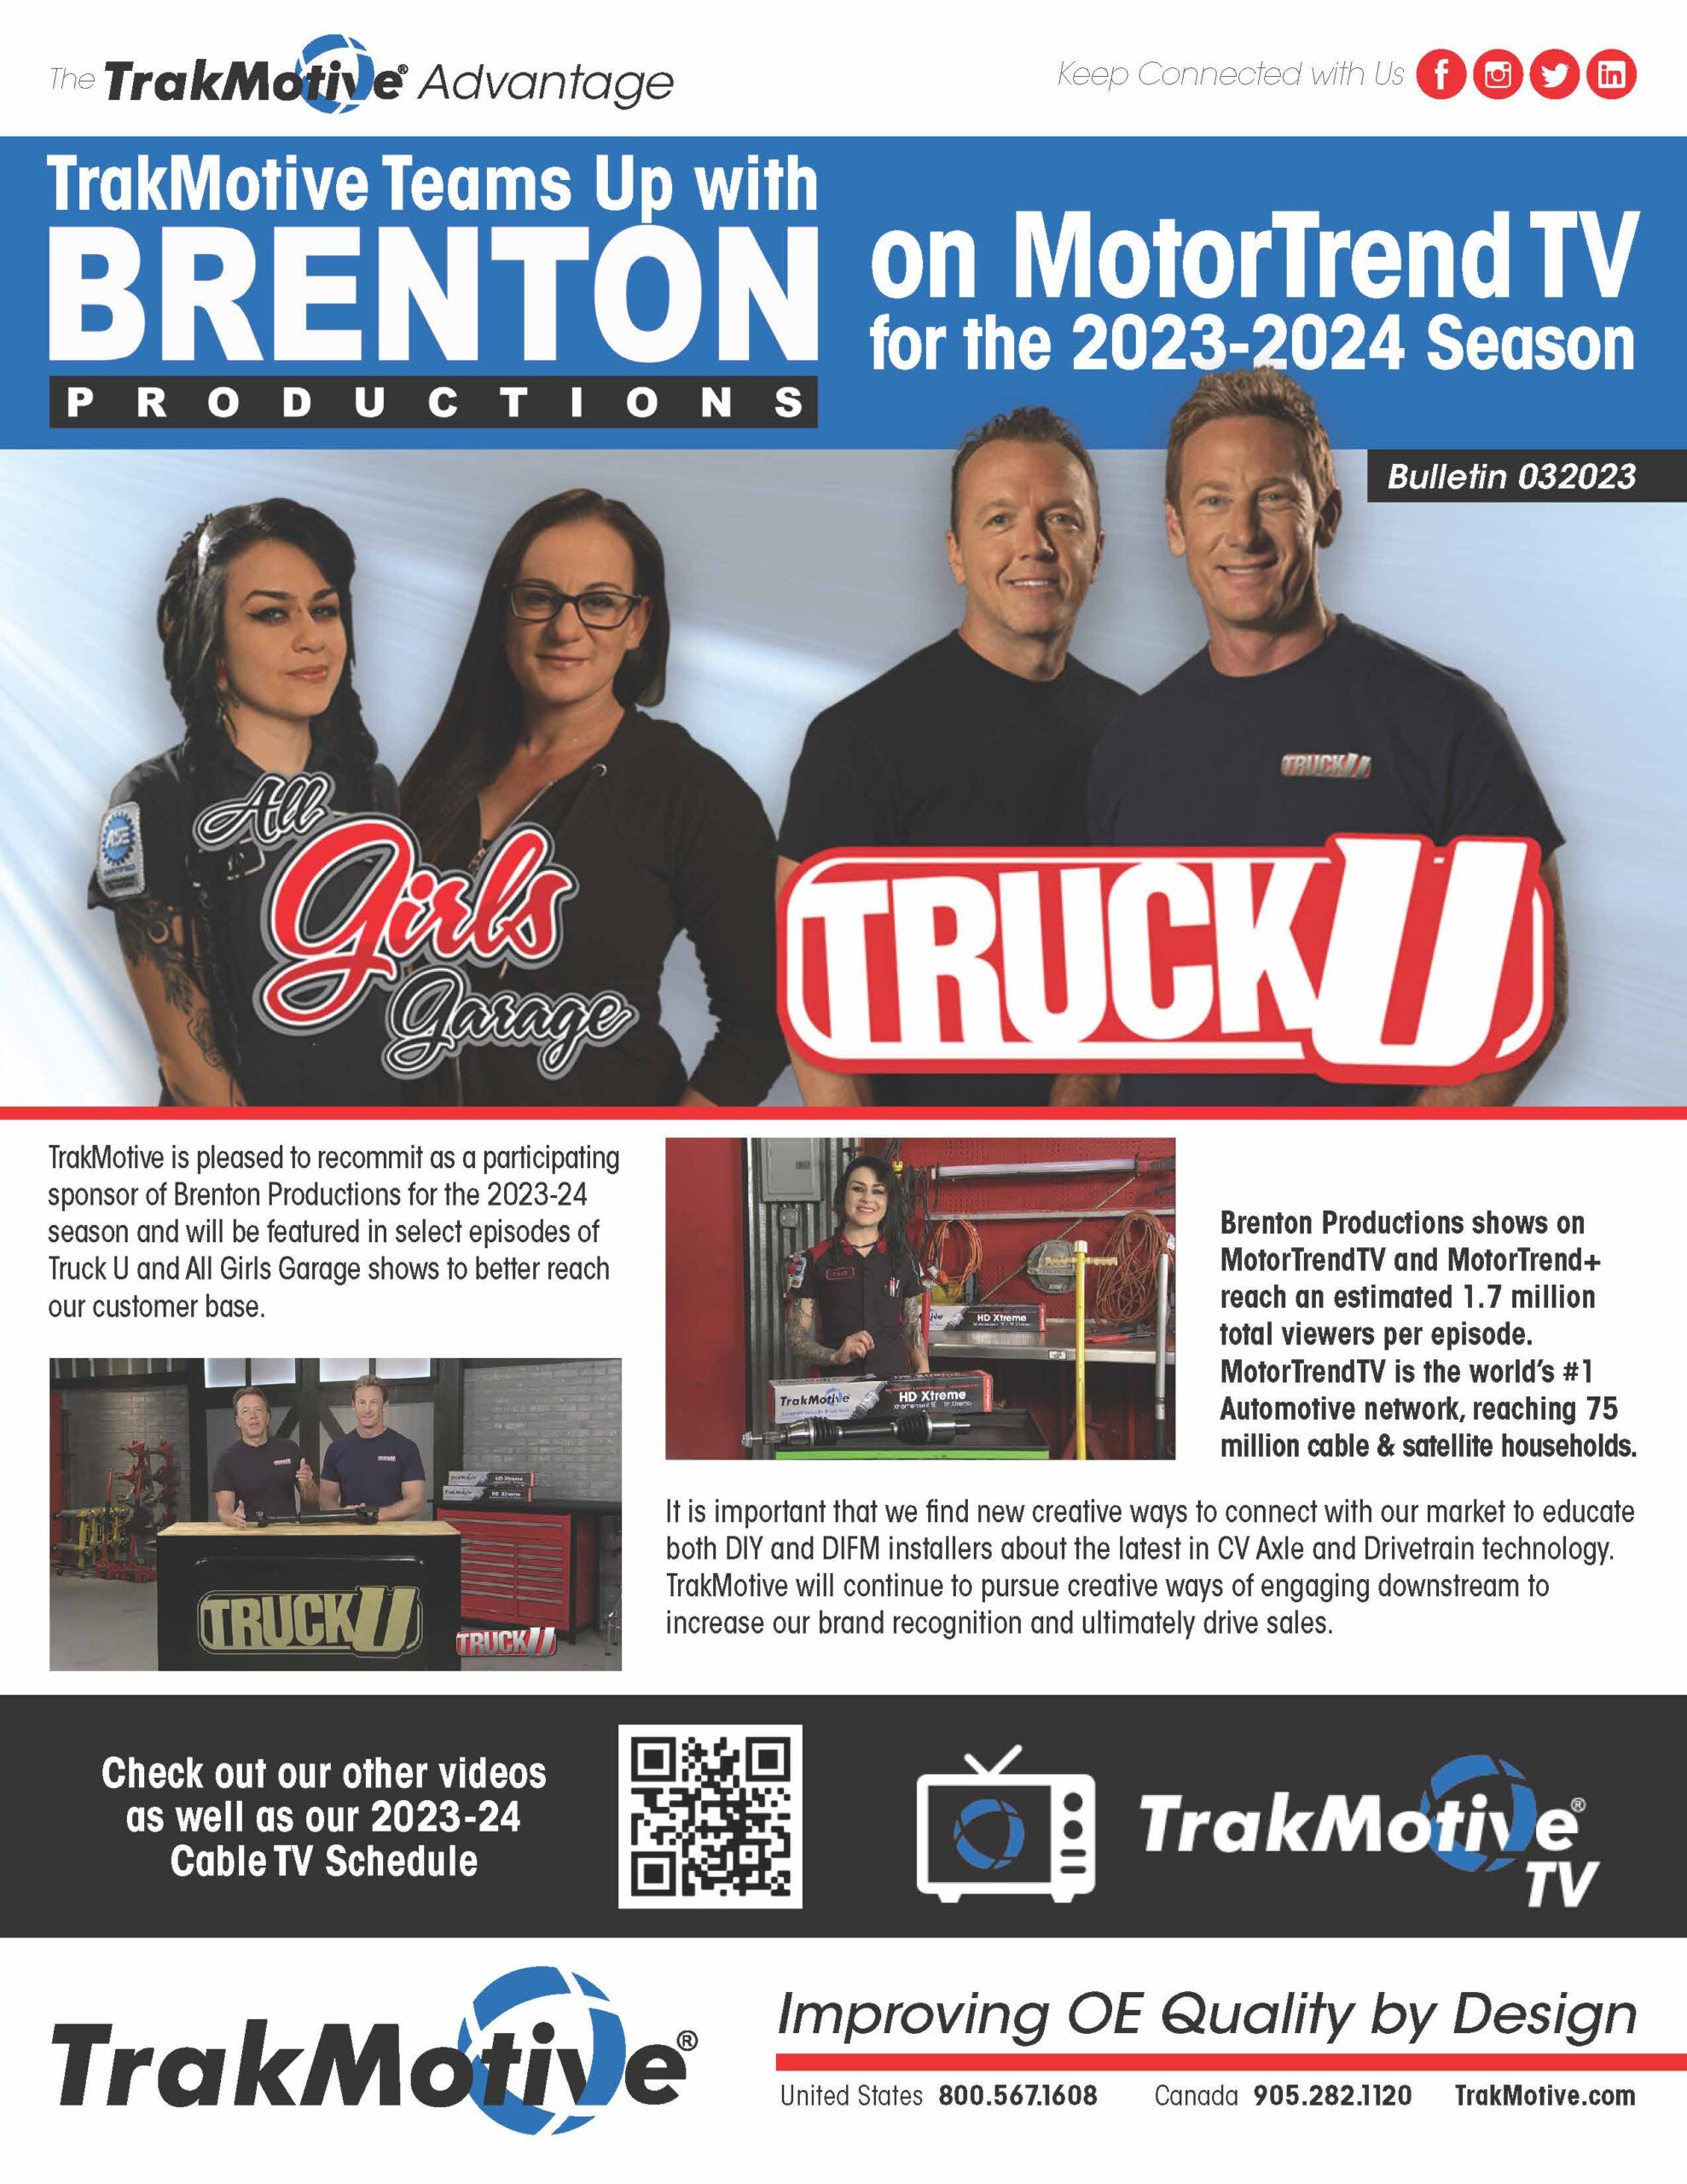 03/2023: TrakMotive Teams Up With Brenton Productions